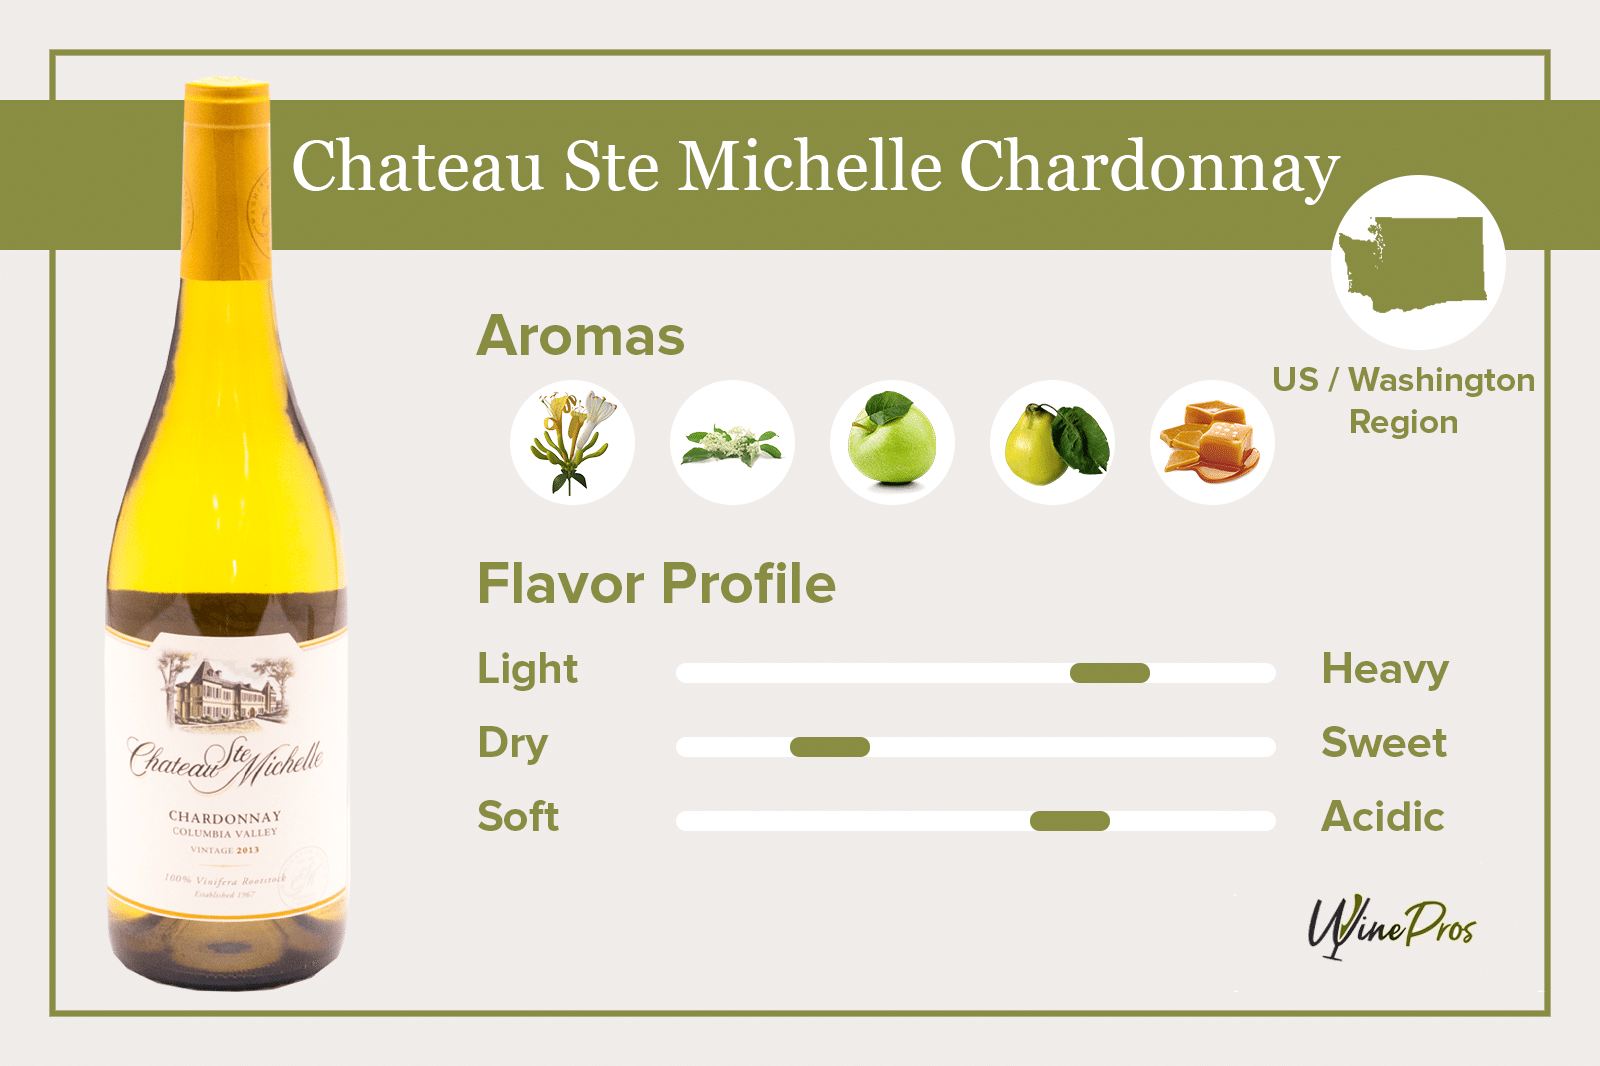 Chateau Ste Michelle Chardonnay Featured